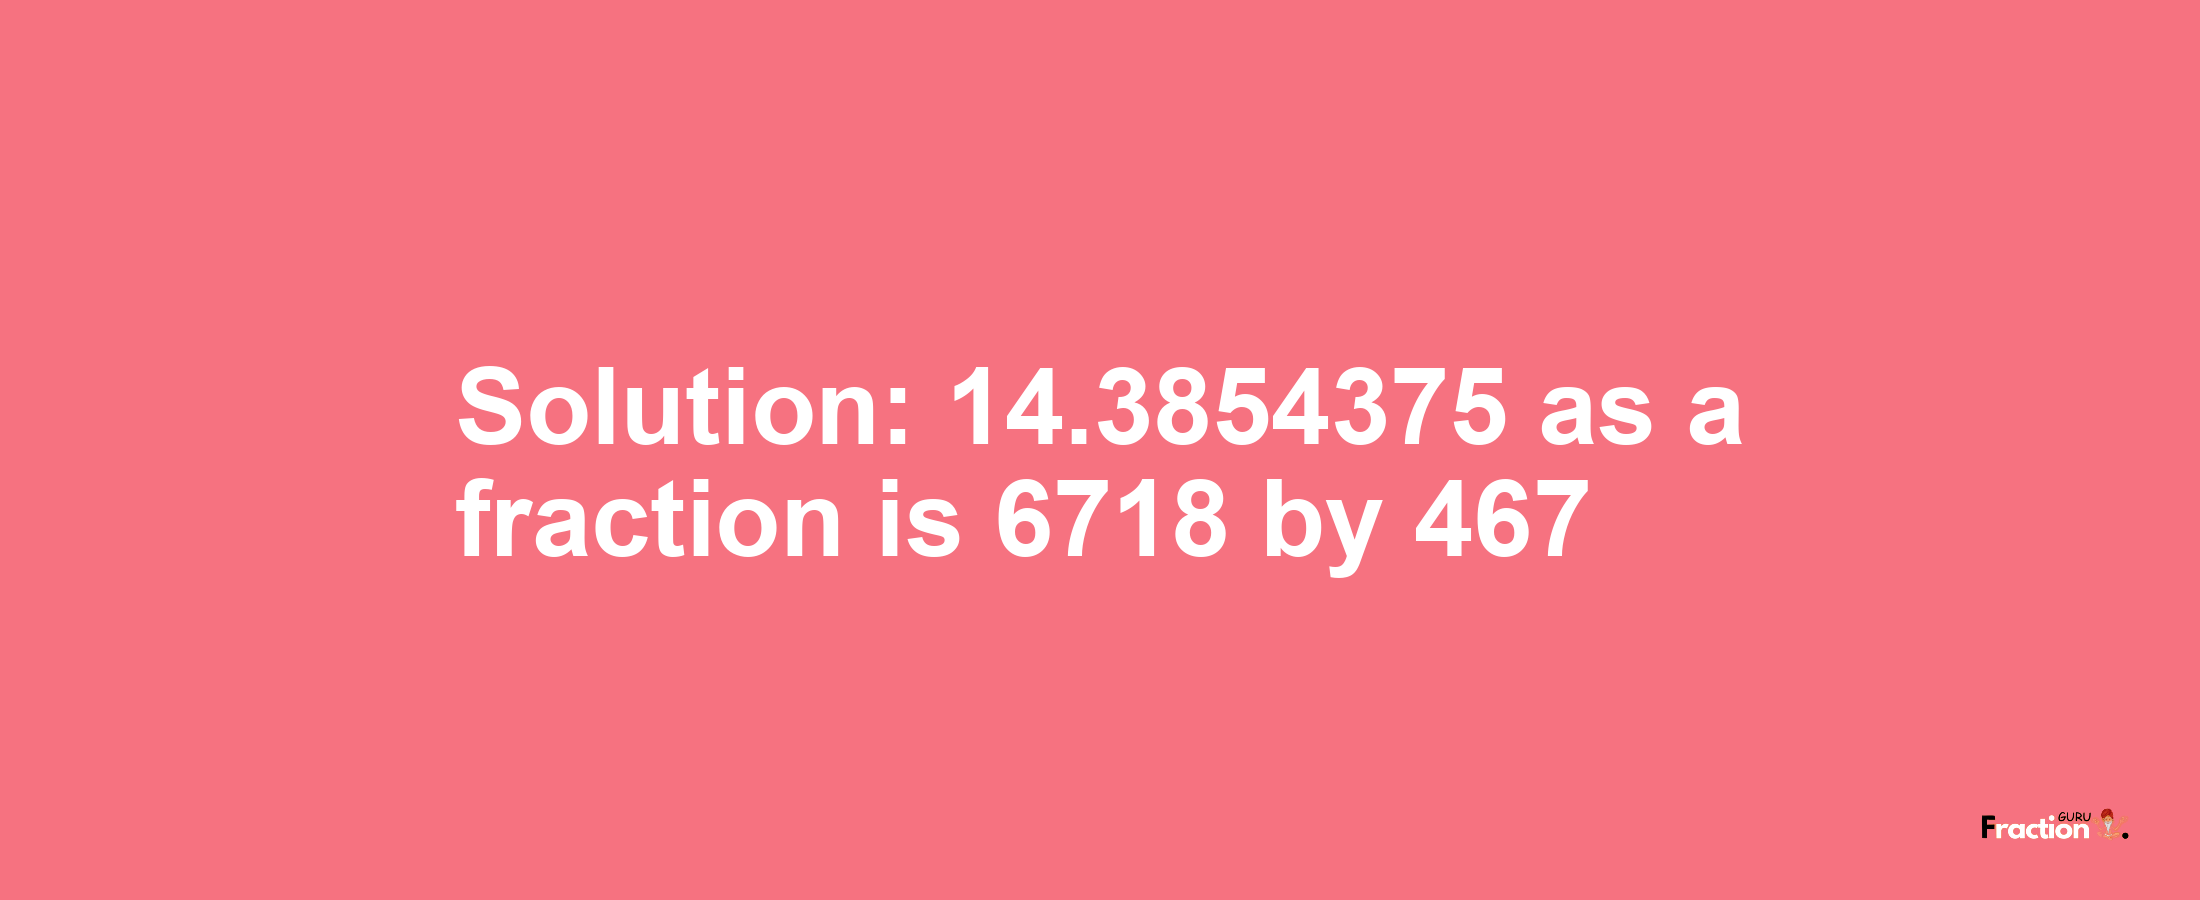 Solution:14.3854375 as a fraction is 6718/467